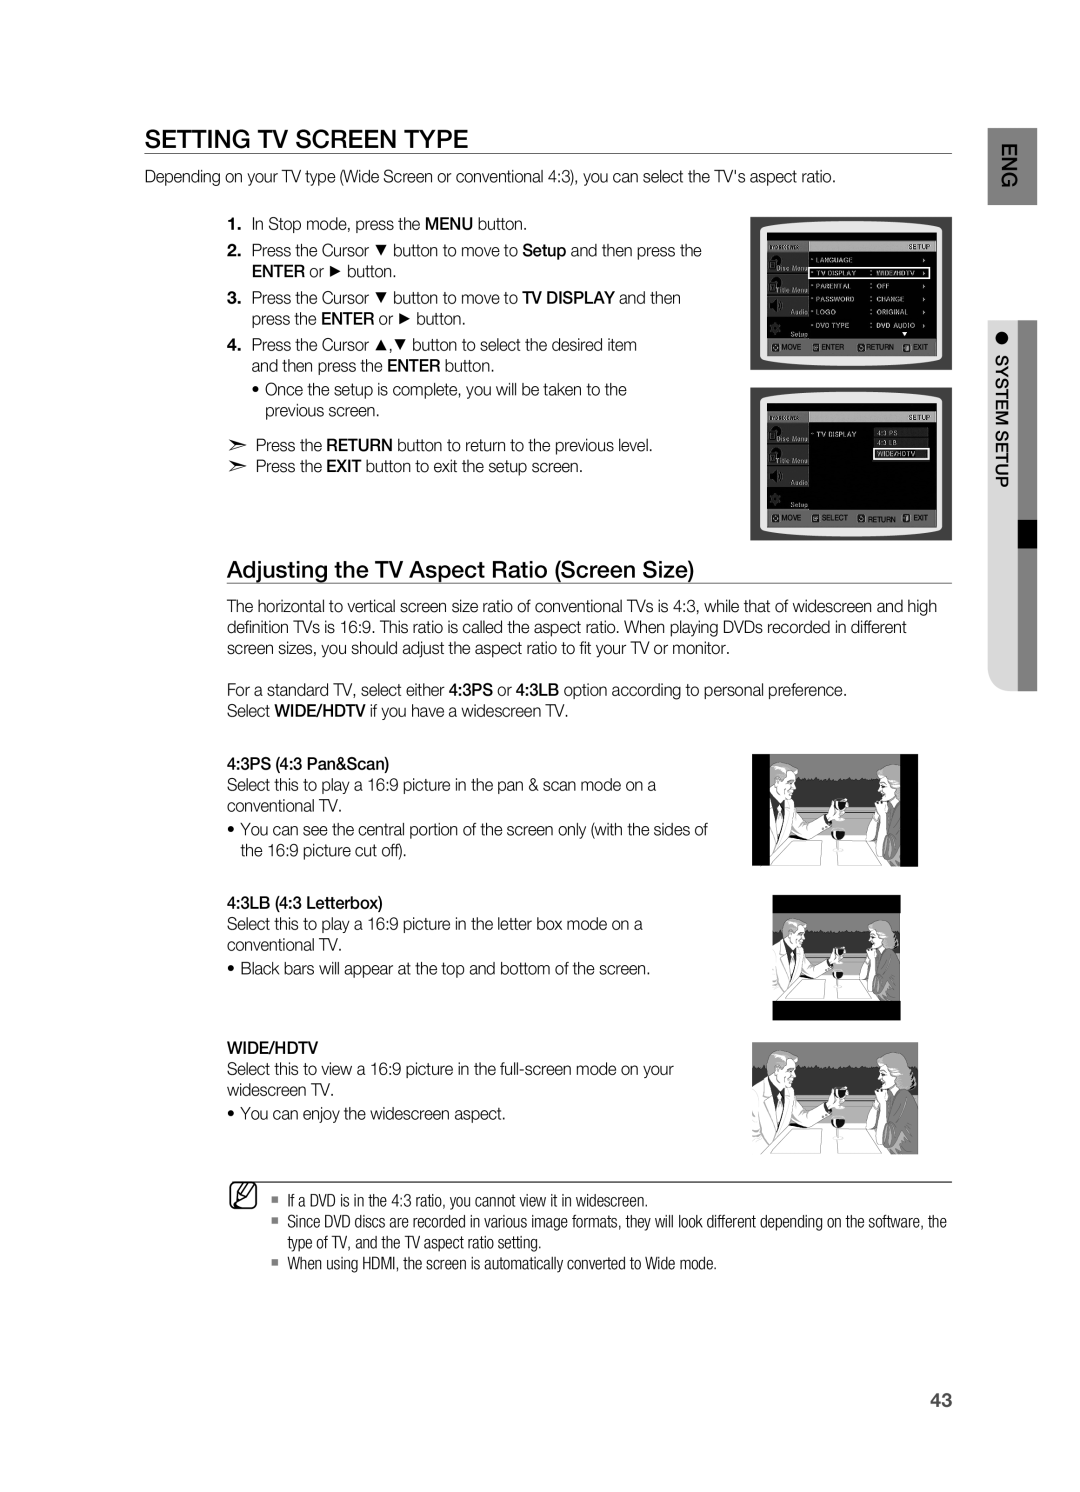 Samsung HT-A100 user manual Setting TV Screen Type, Adjusting the TV Aspect Ratio Screen Size 